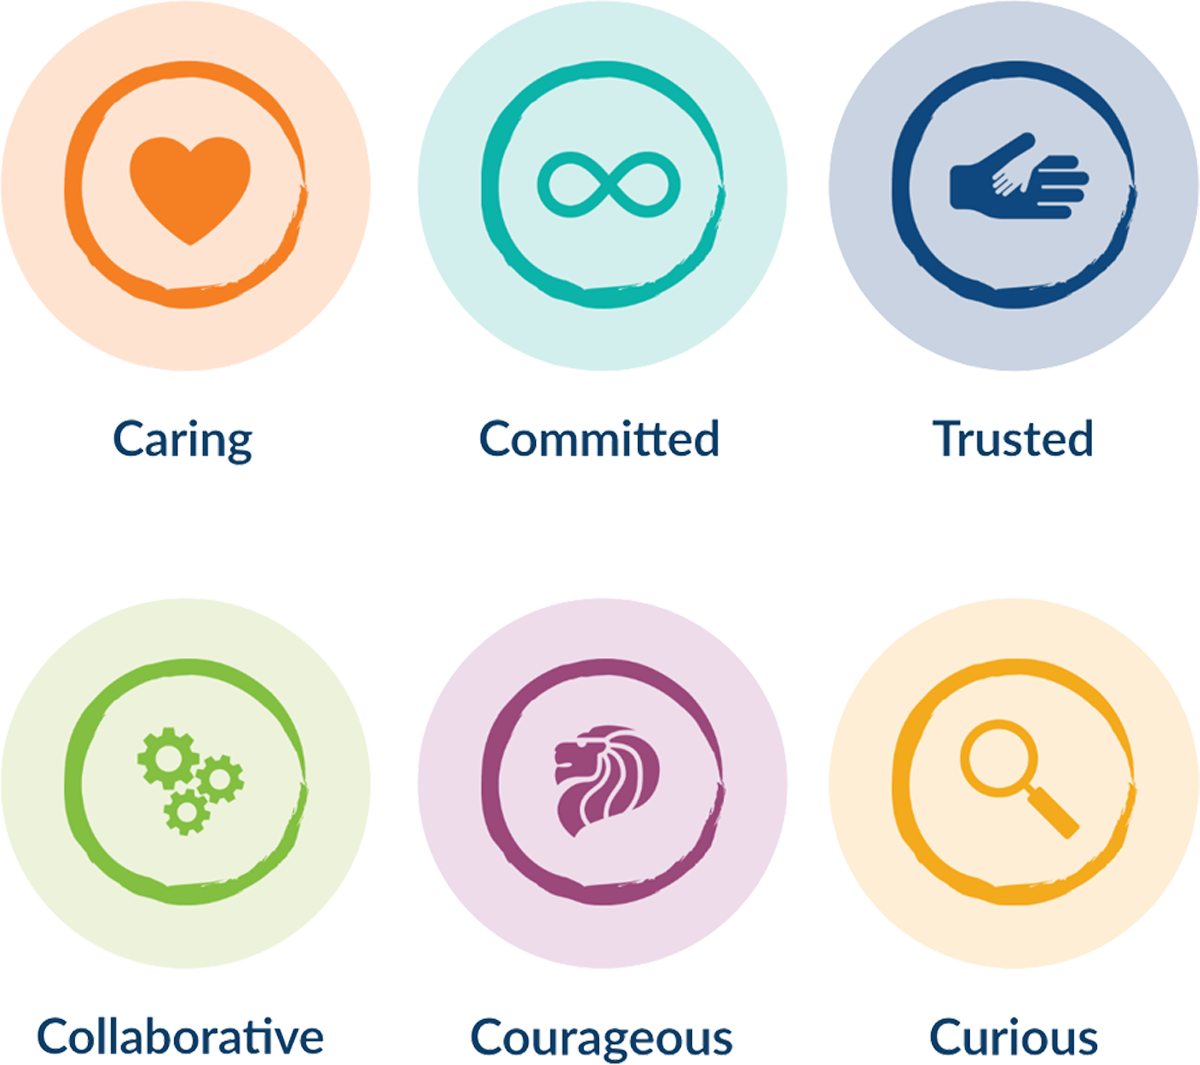 Acorns values shown as icons. Listing: Caring, Committed, Trusted, Collaborative, Courageous and Curious